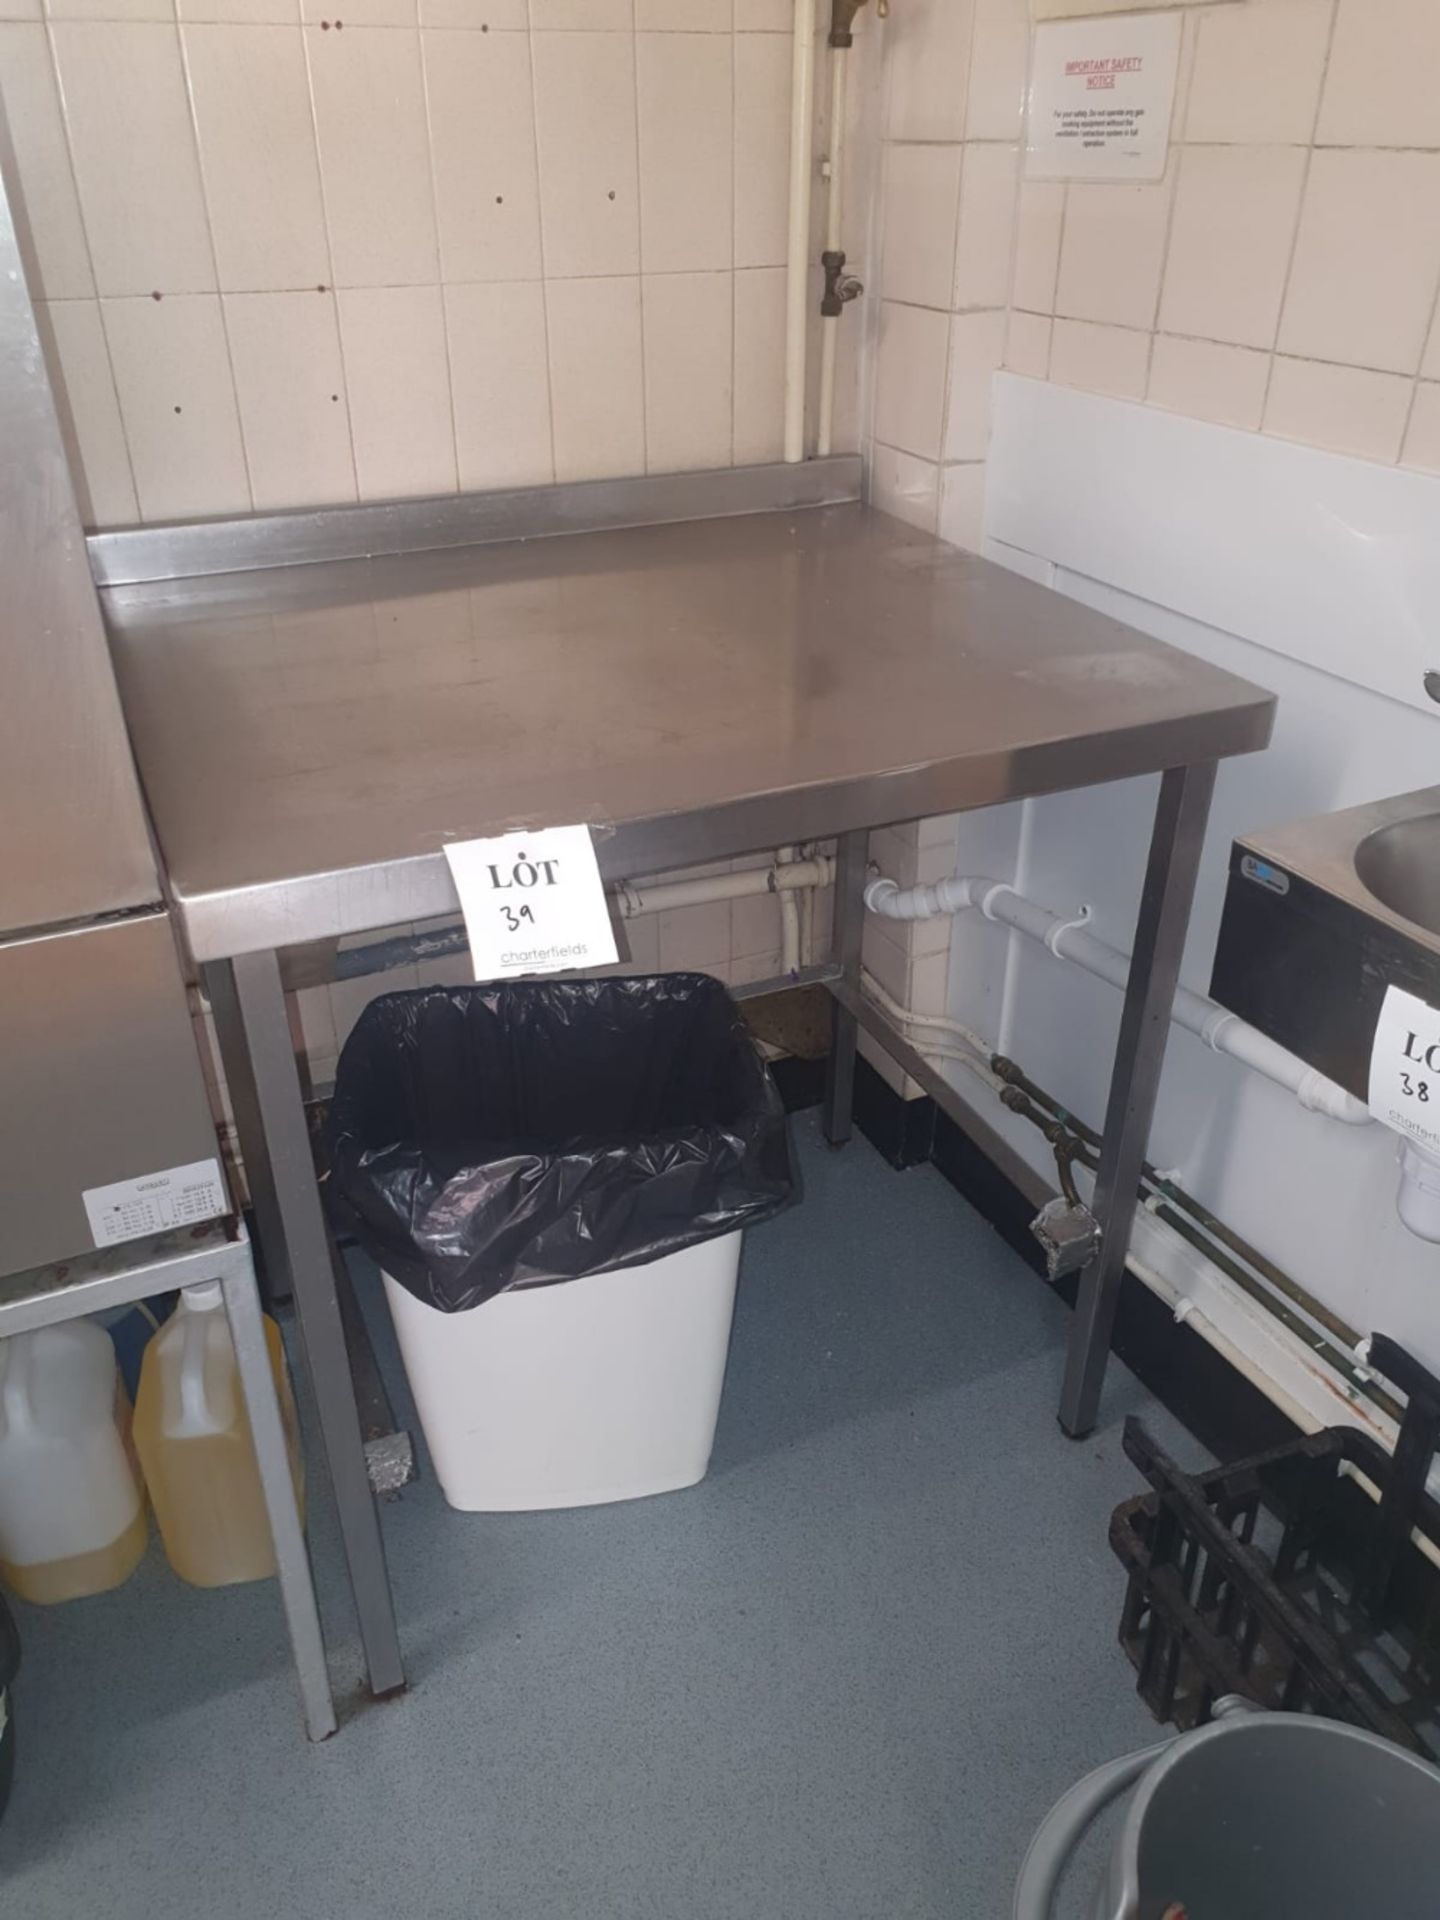 Stainless steel preparation table - approximately 1m x 1m